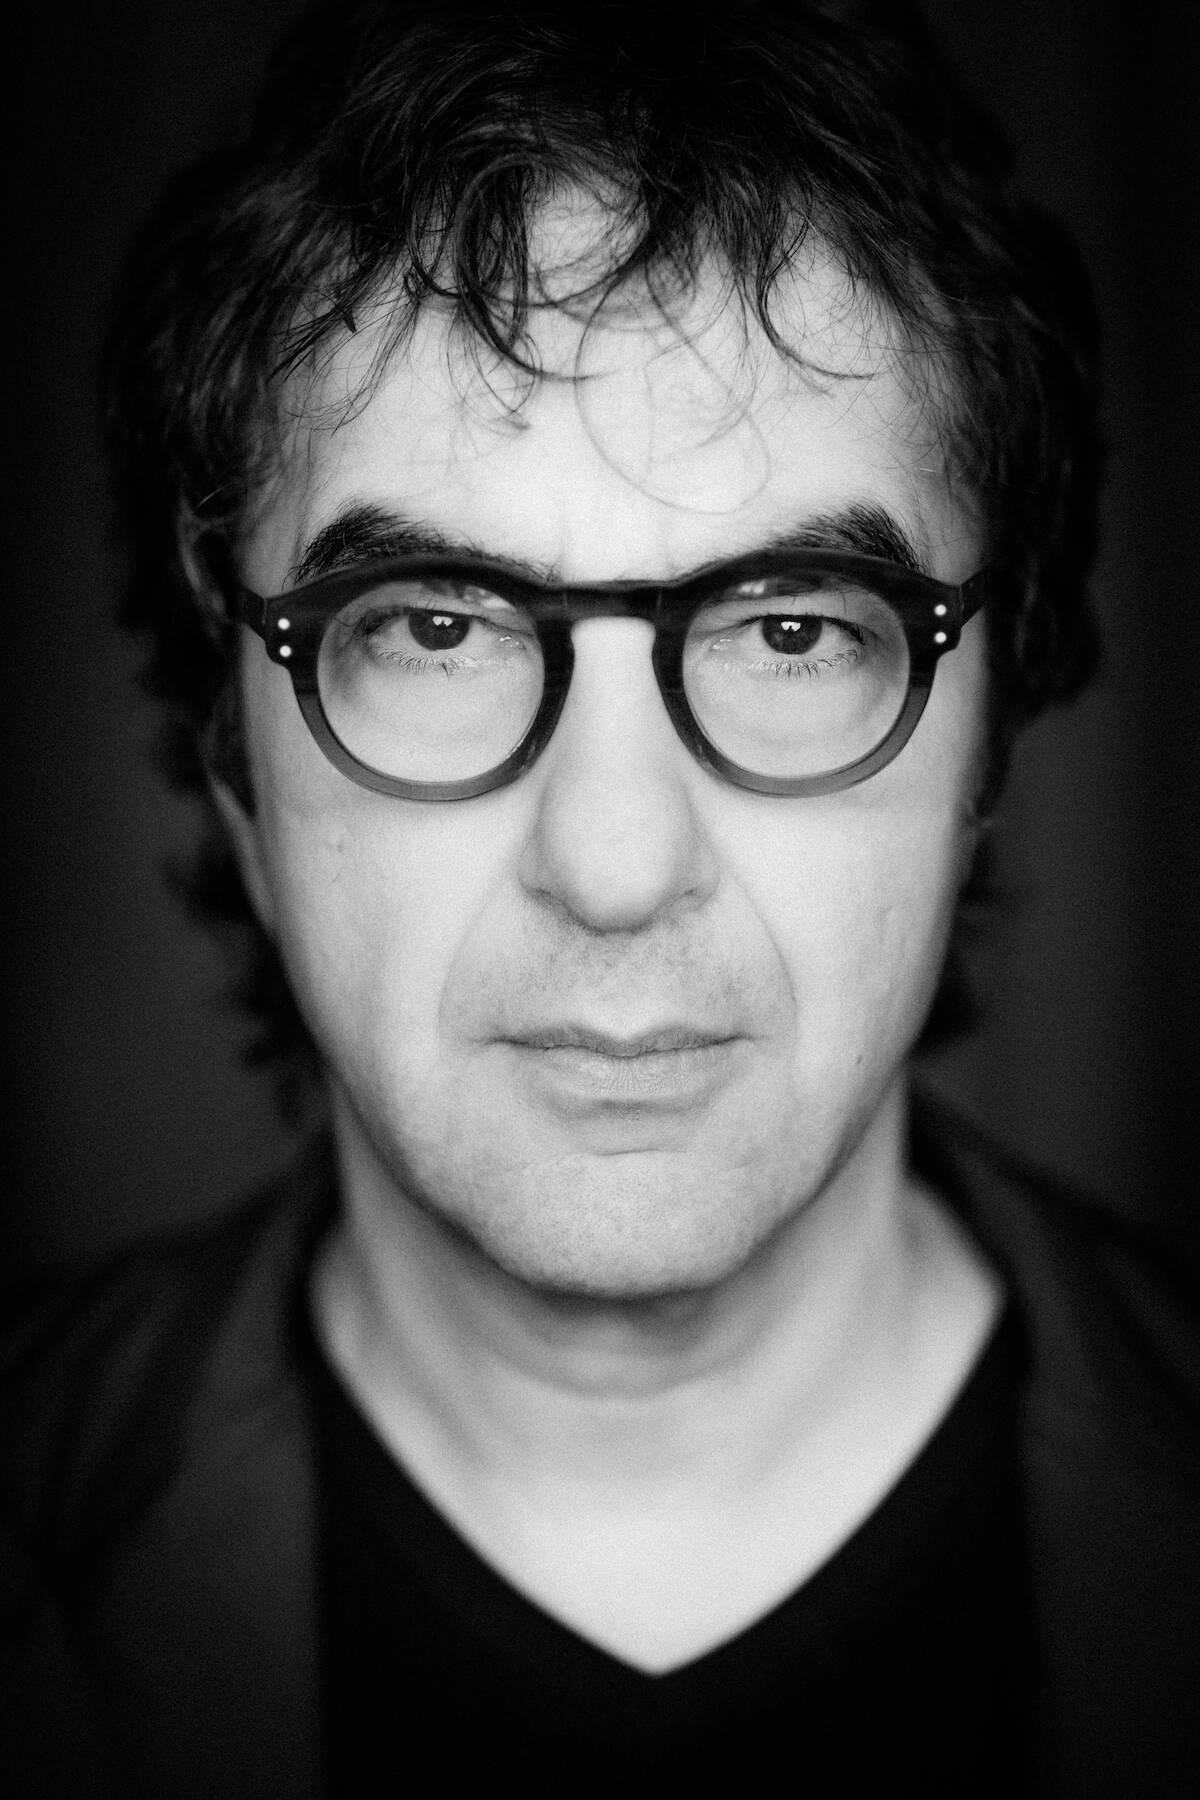 Director Atom Egoyan produced Salome for the Canadian Opera Company (COC) and Vancouver Opera in 1996 and 1997. His latest film “Seven Veils” tells a layered narrative of a fictional remount of the opera. (Ulysse del Drago)